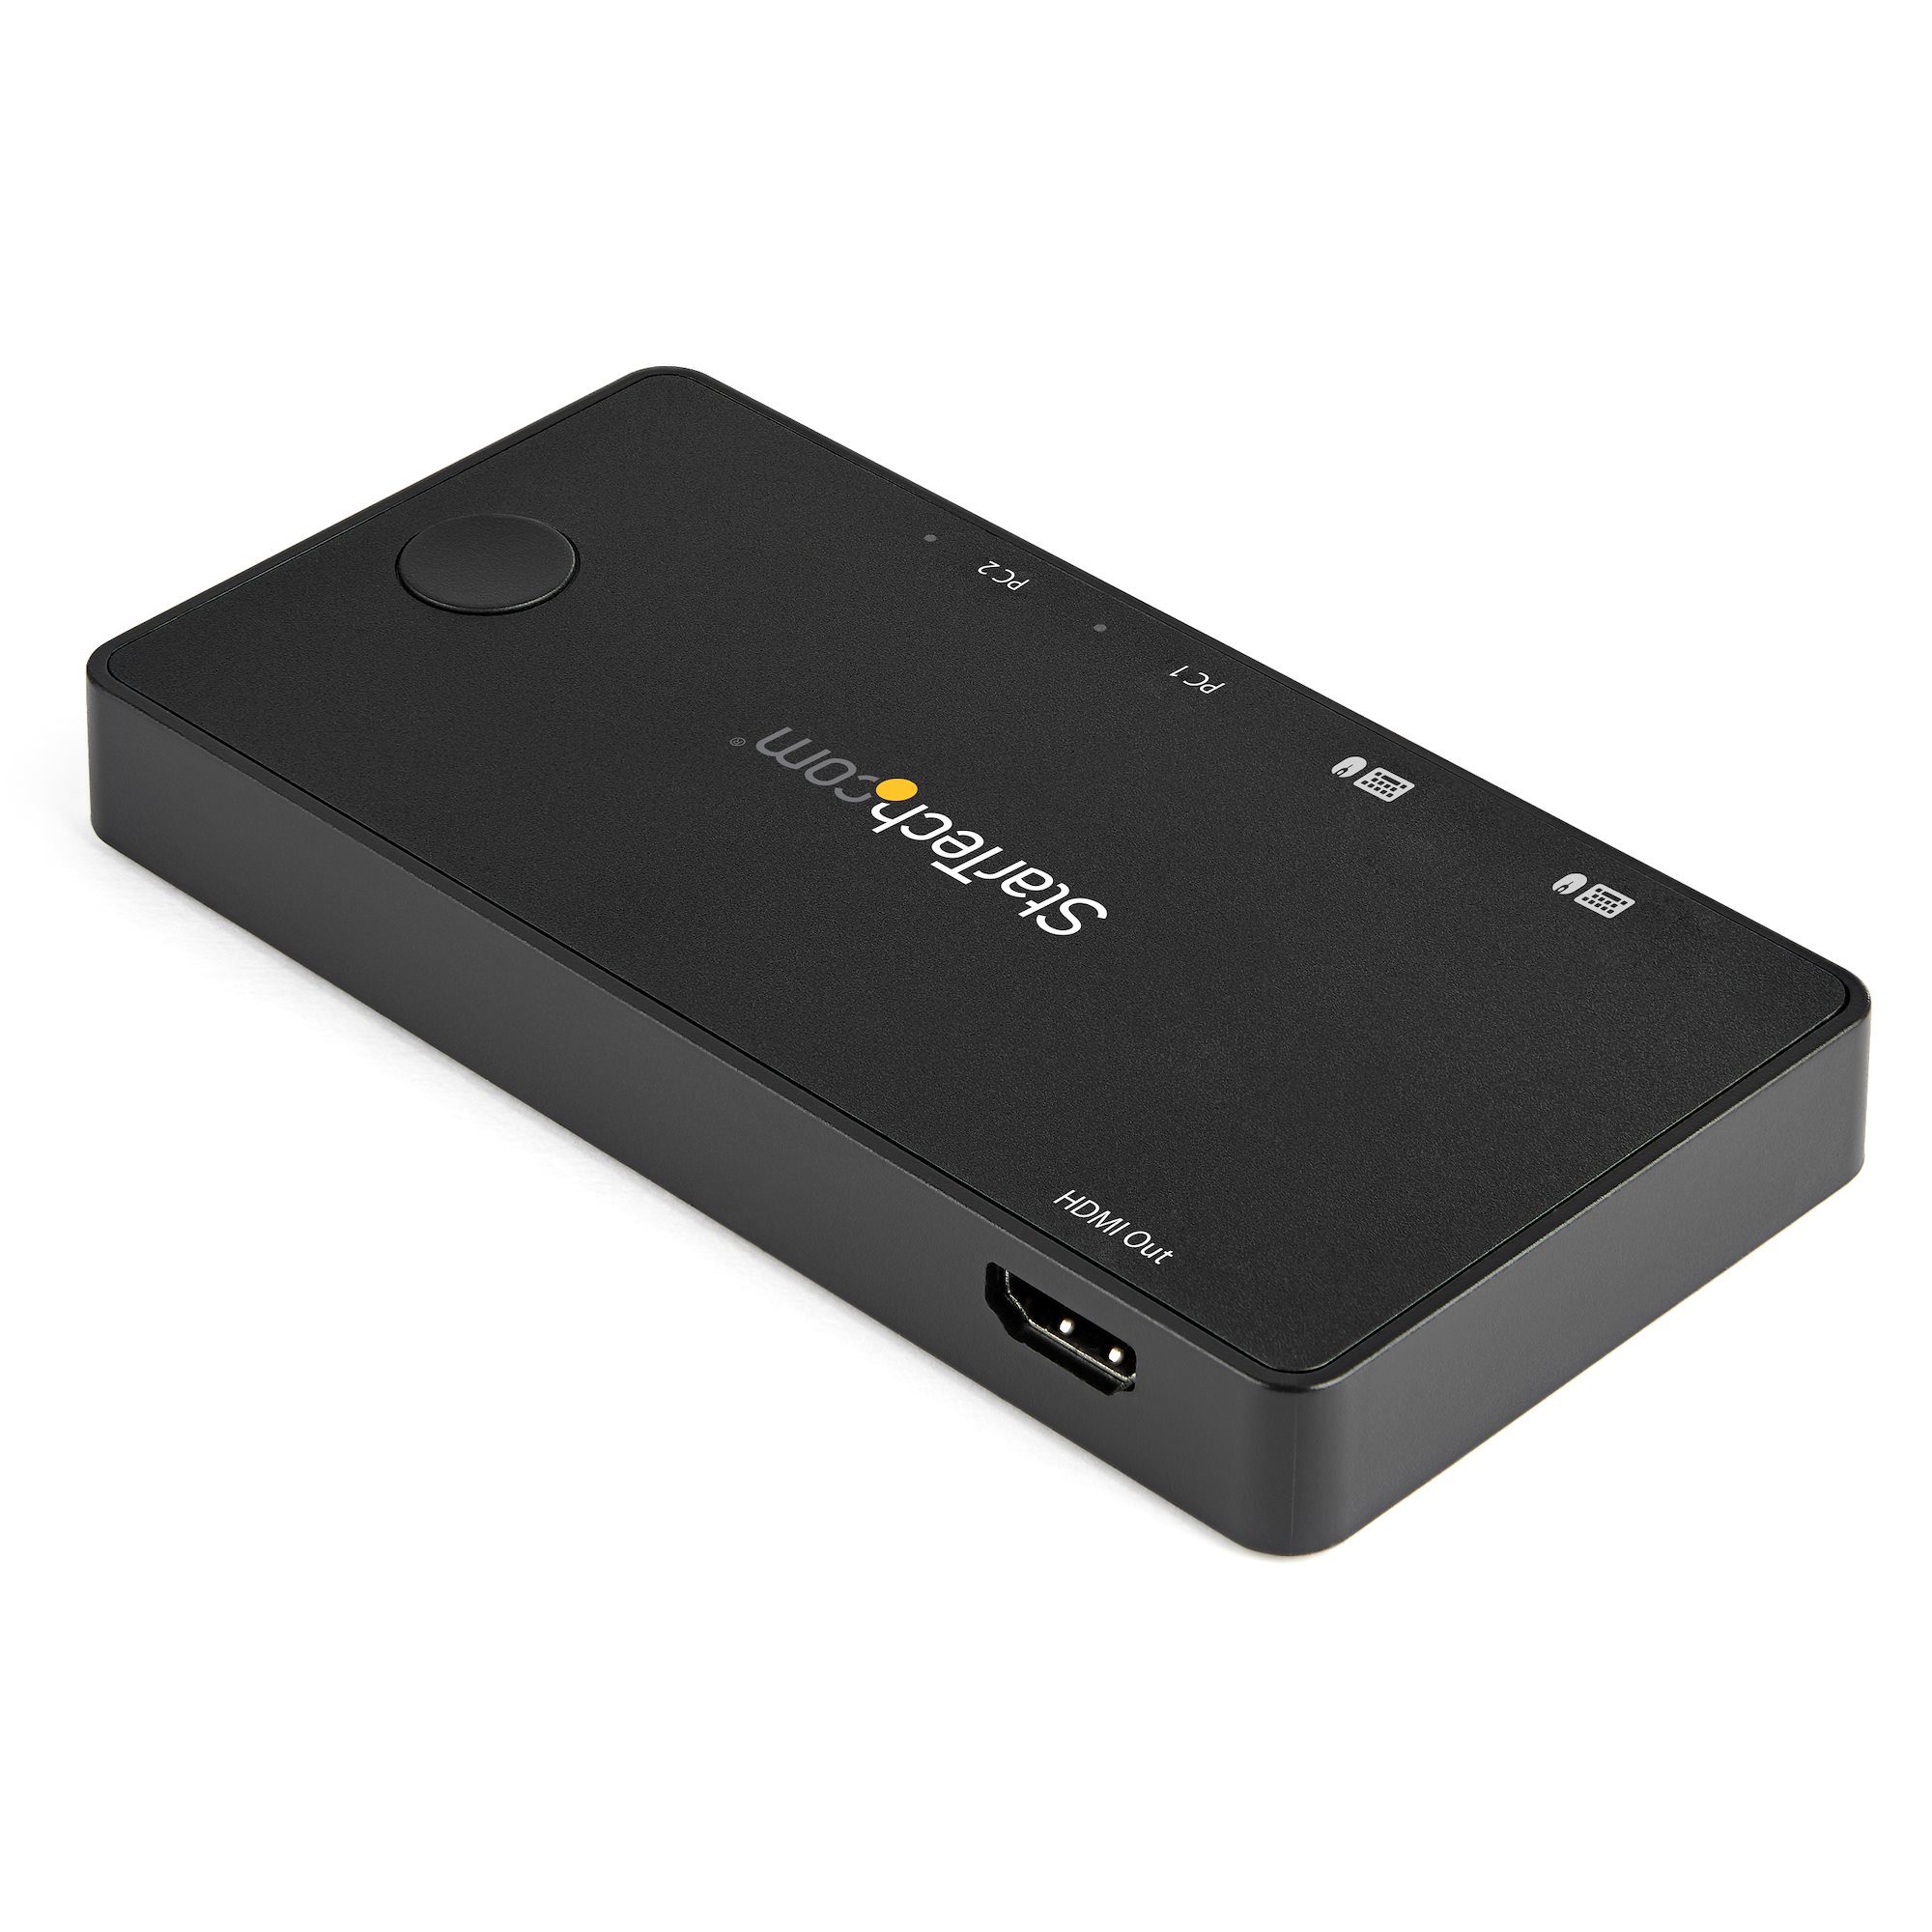 Semoic 2 Port HDMI KVM Switch with Cables EL-21UHC 